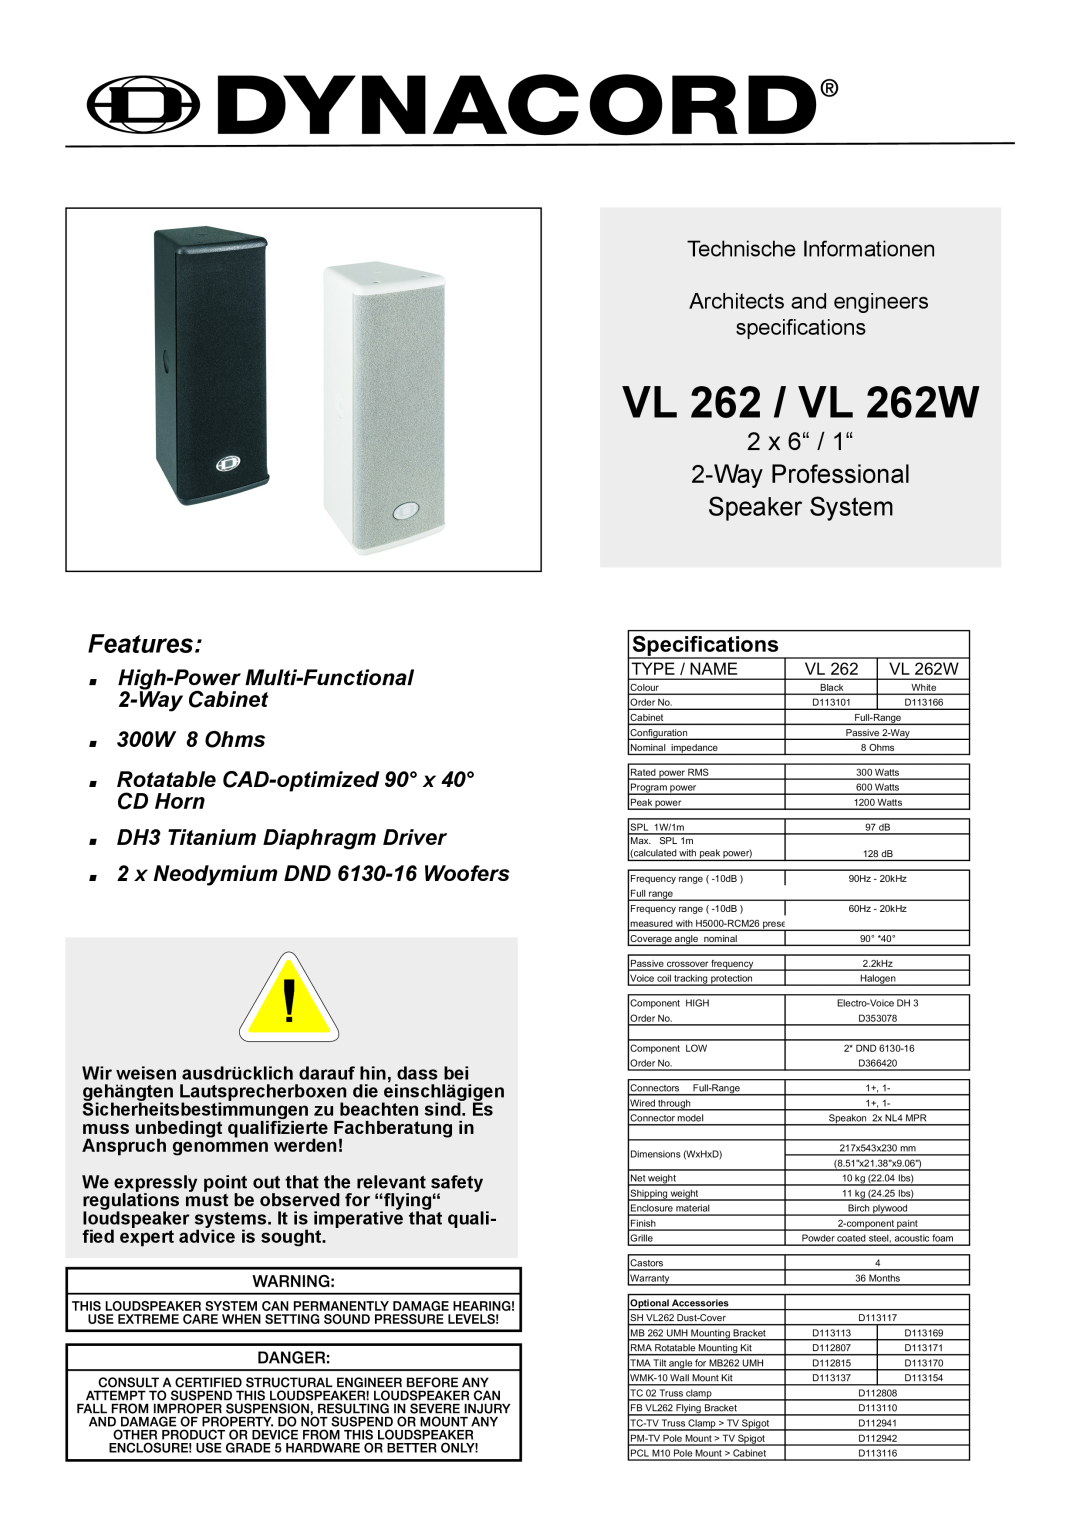 Dynacord VL262 specifications Specifications, VL 262 / VL 262W, Features, 2 x 6“ / 1“ 2-WayProfessional Speaker System 